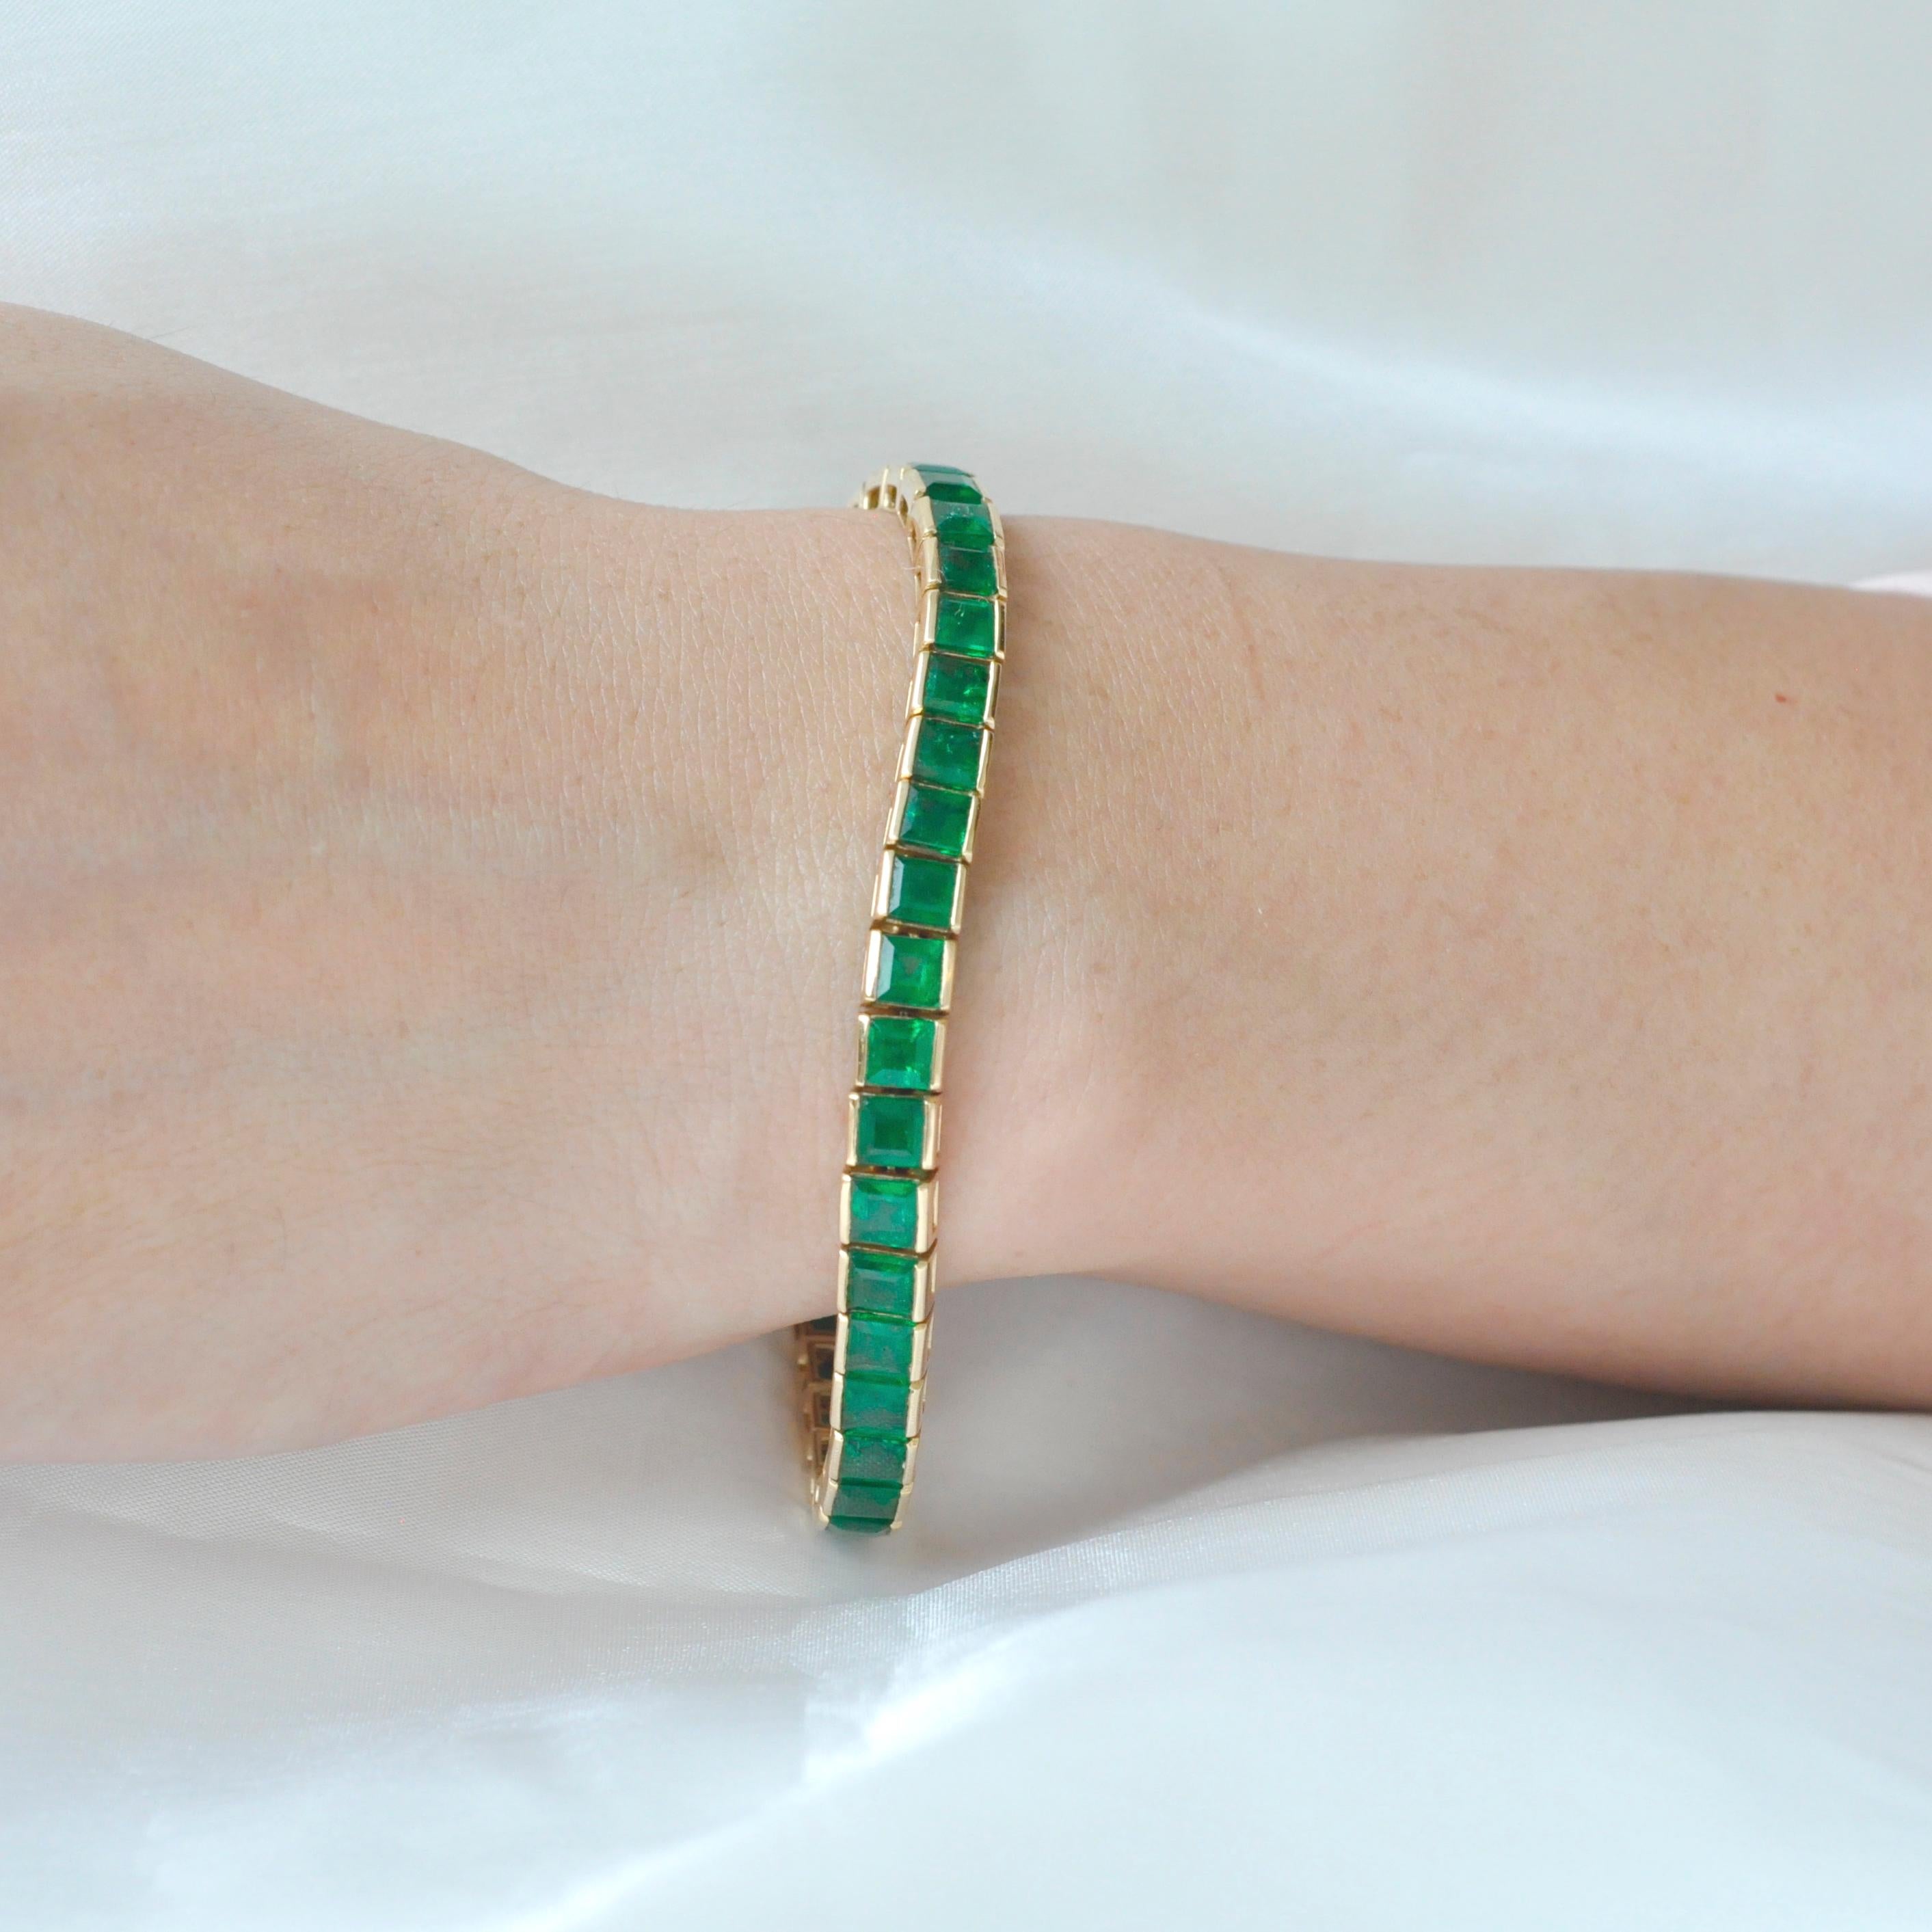 This is an elegant Sandawana Emerald tennis bracelet featuring 38 square emeralds with 13.85 carats in the nice channel setting. Sandawana emeralds are well known internationally for their splendid vivid green colour. This bracelet entirely made in